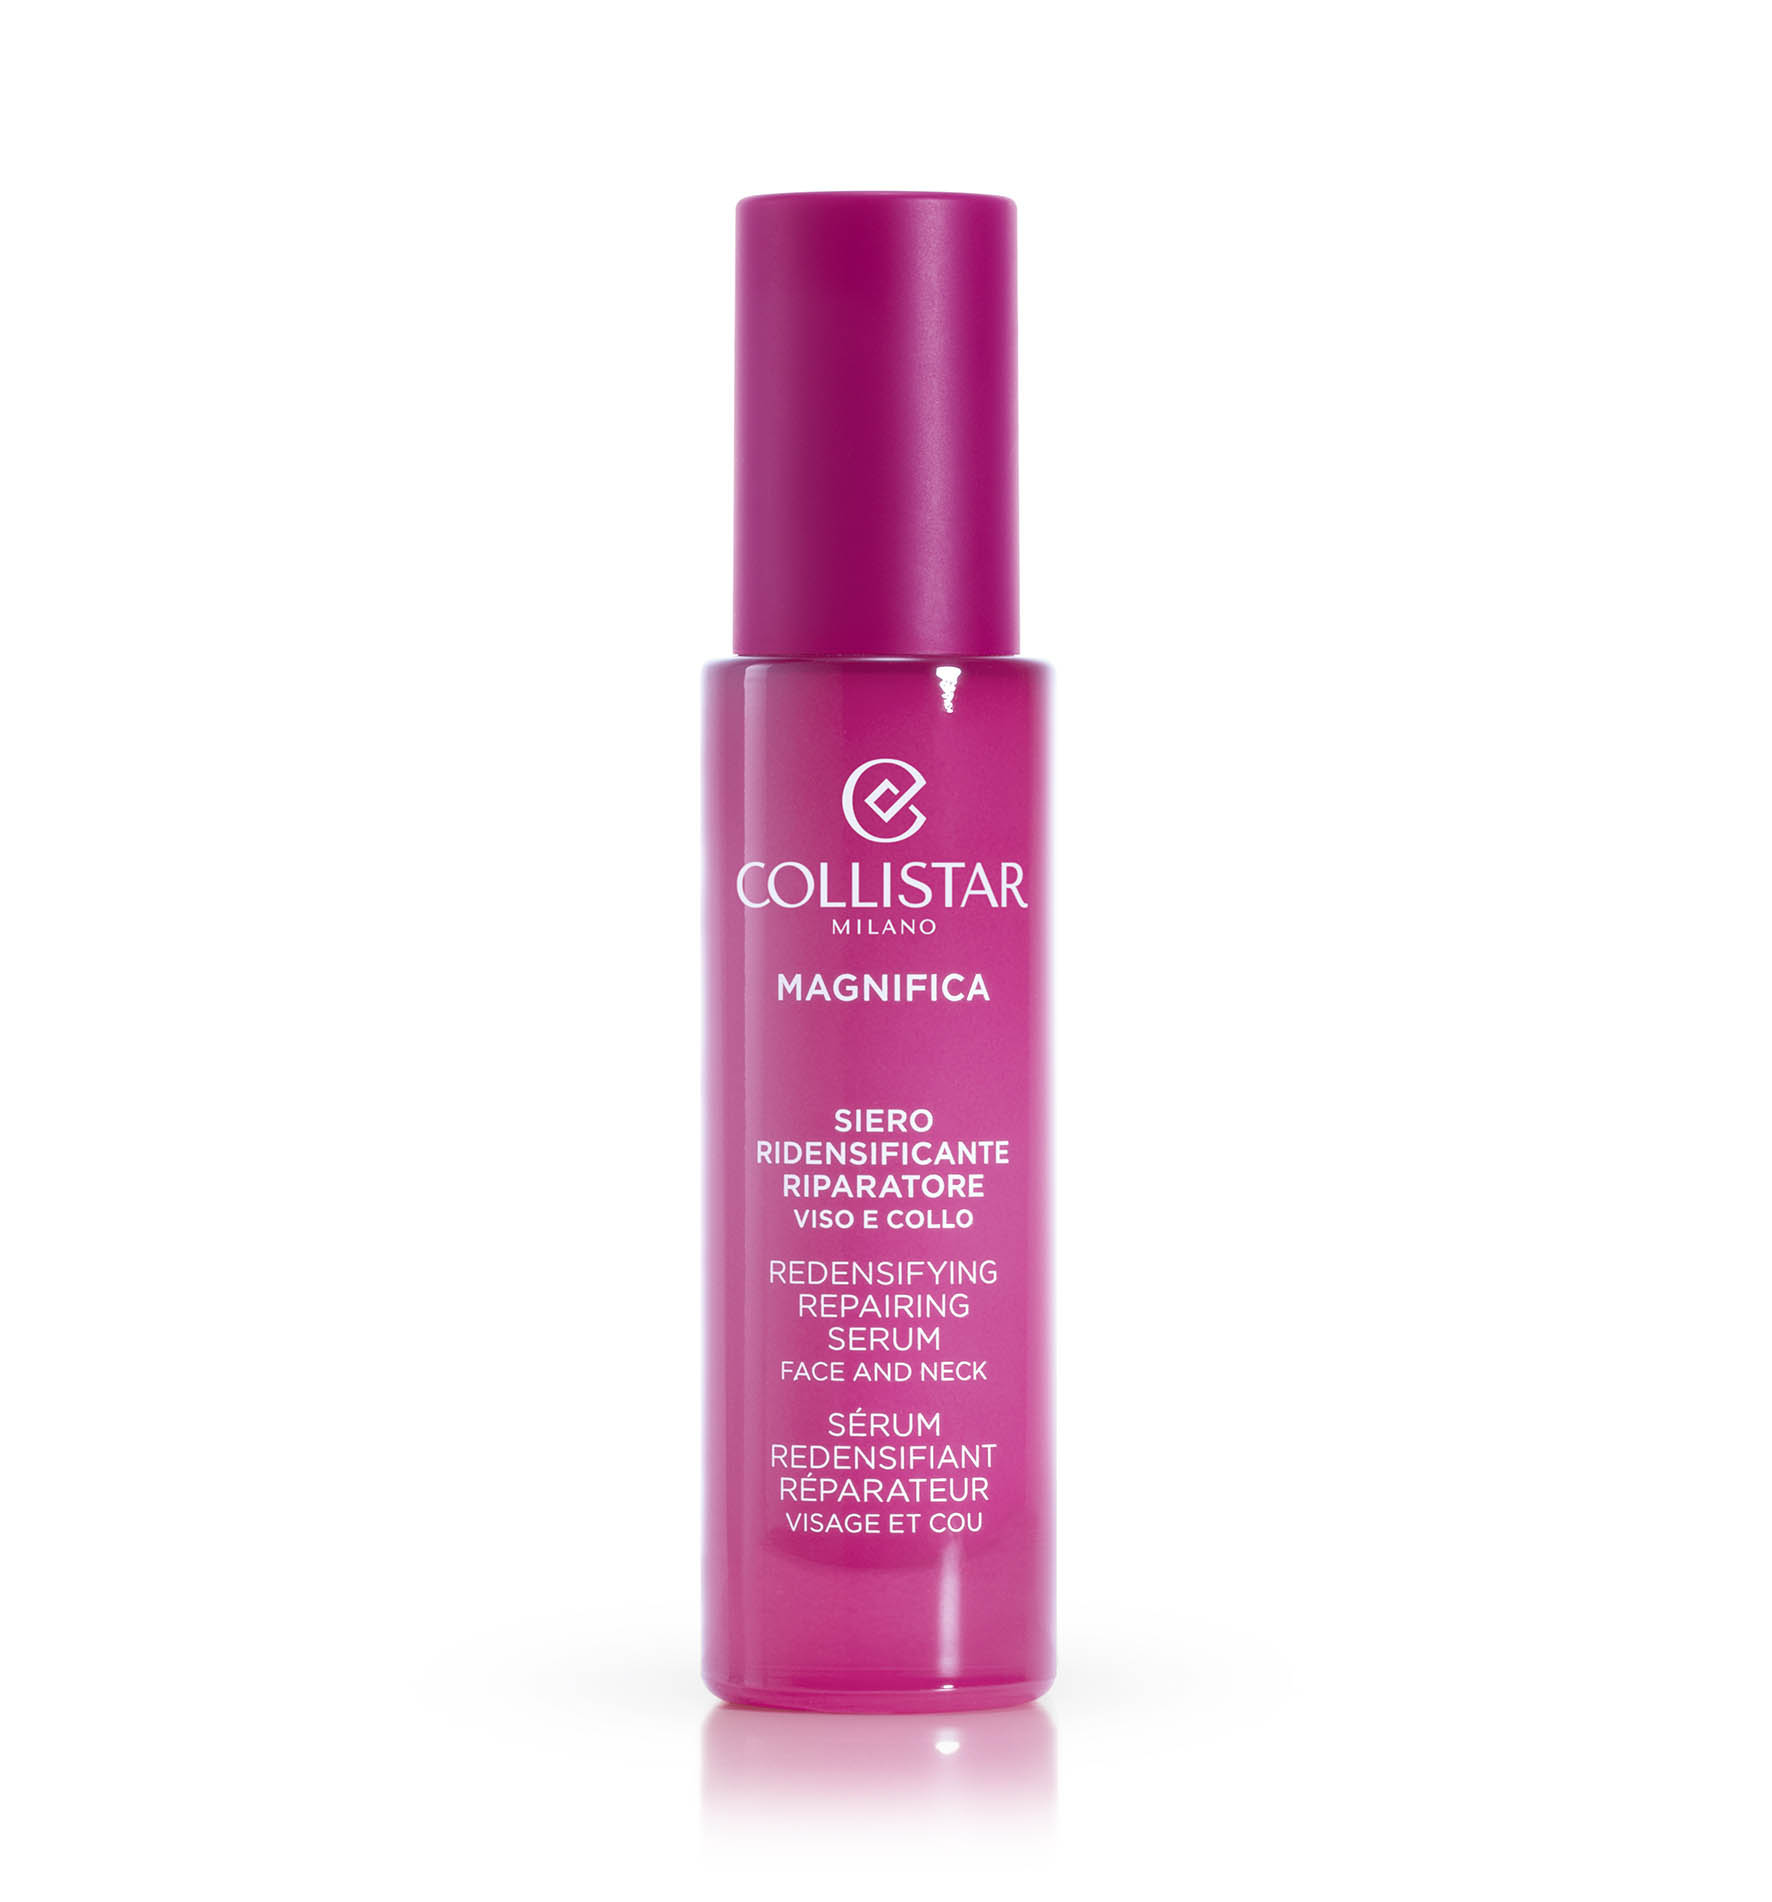 MAGNIFICA REDENSIFYING REPAIRING SERUM FACE AND NECK | Collistar - Shop Online Ufficiale